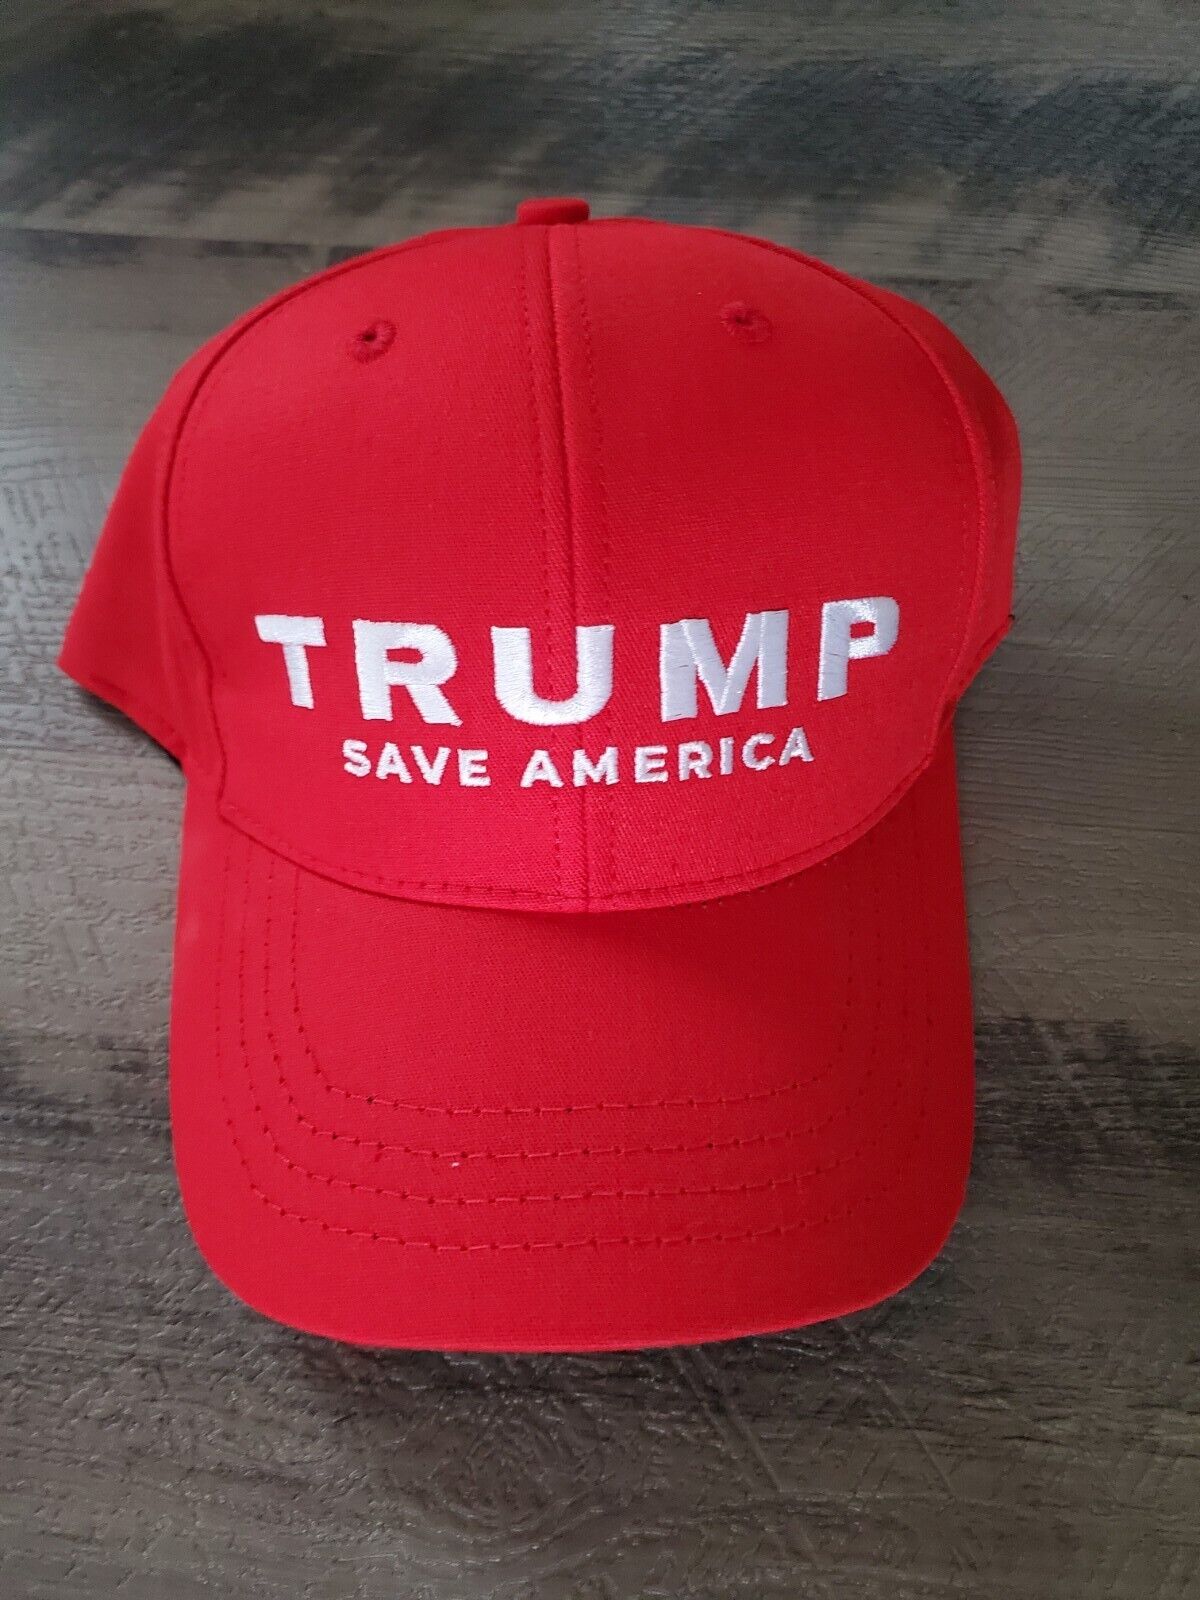 DONALD TRUMP OFFICIAL HAT TRUMP SAVE AMERICA New RED & WHITE NEW RARE